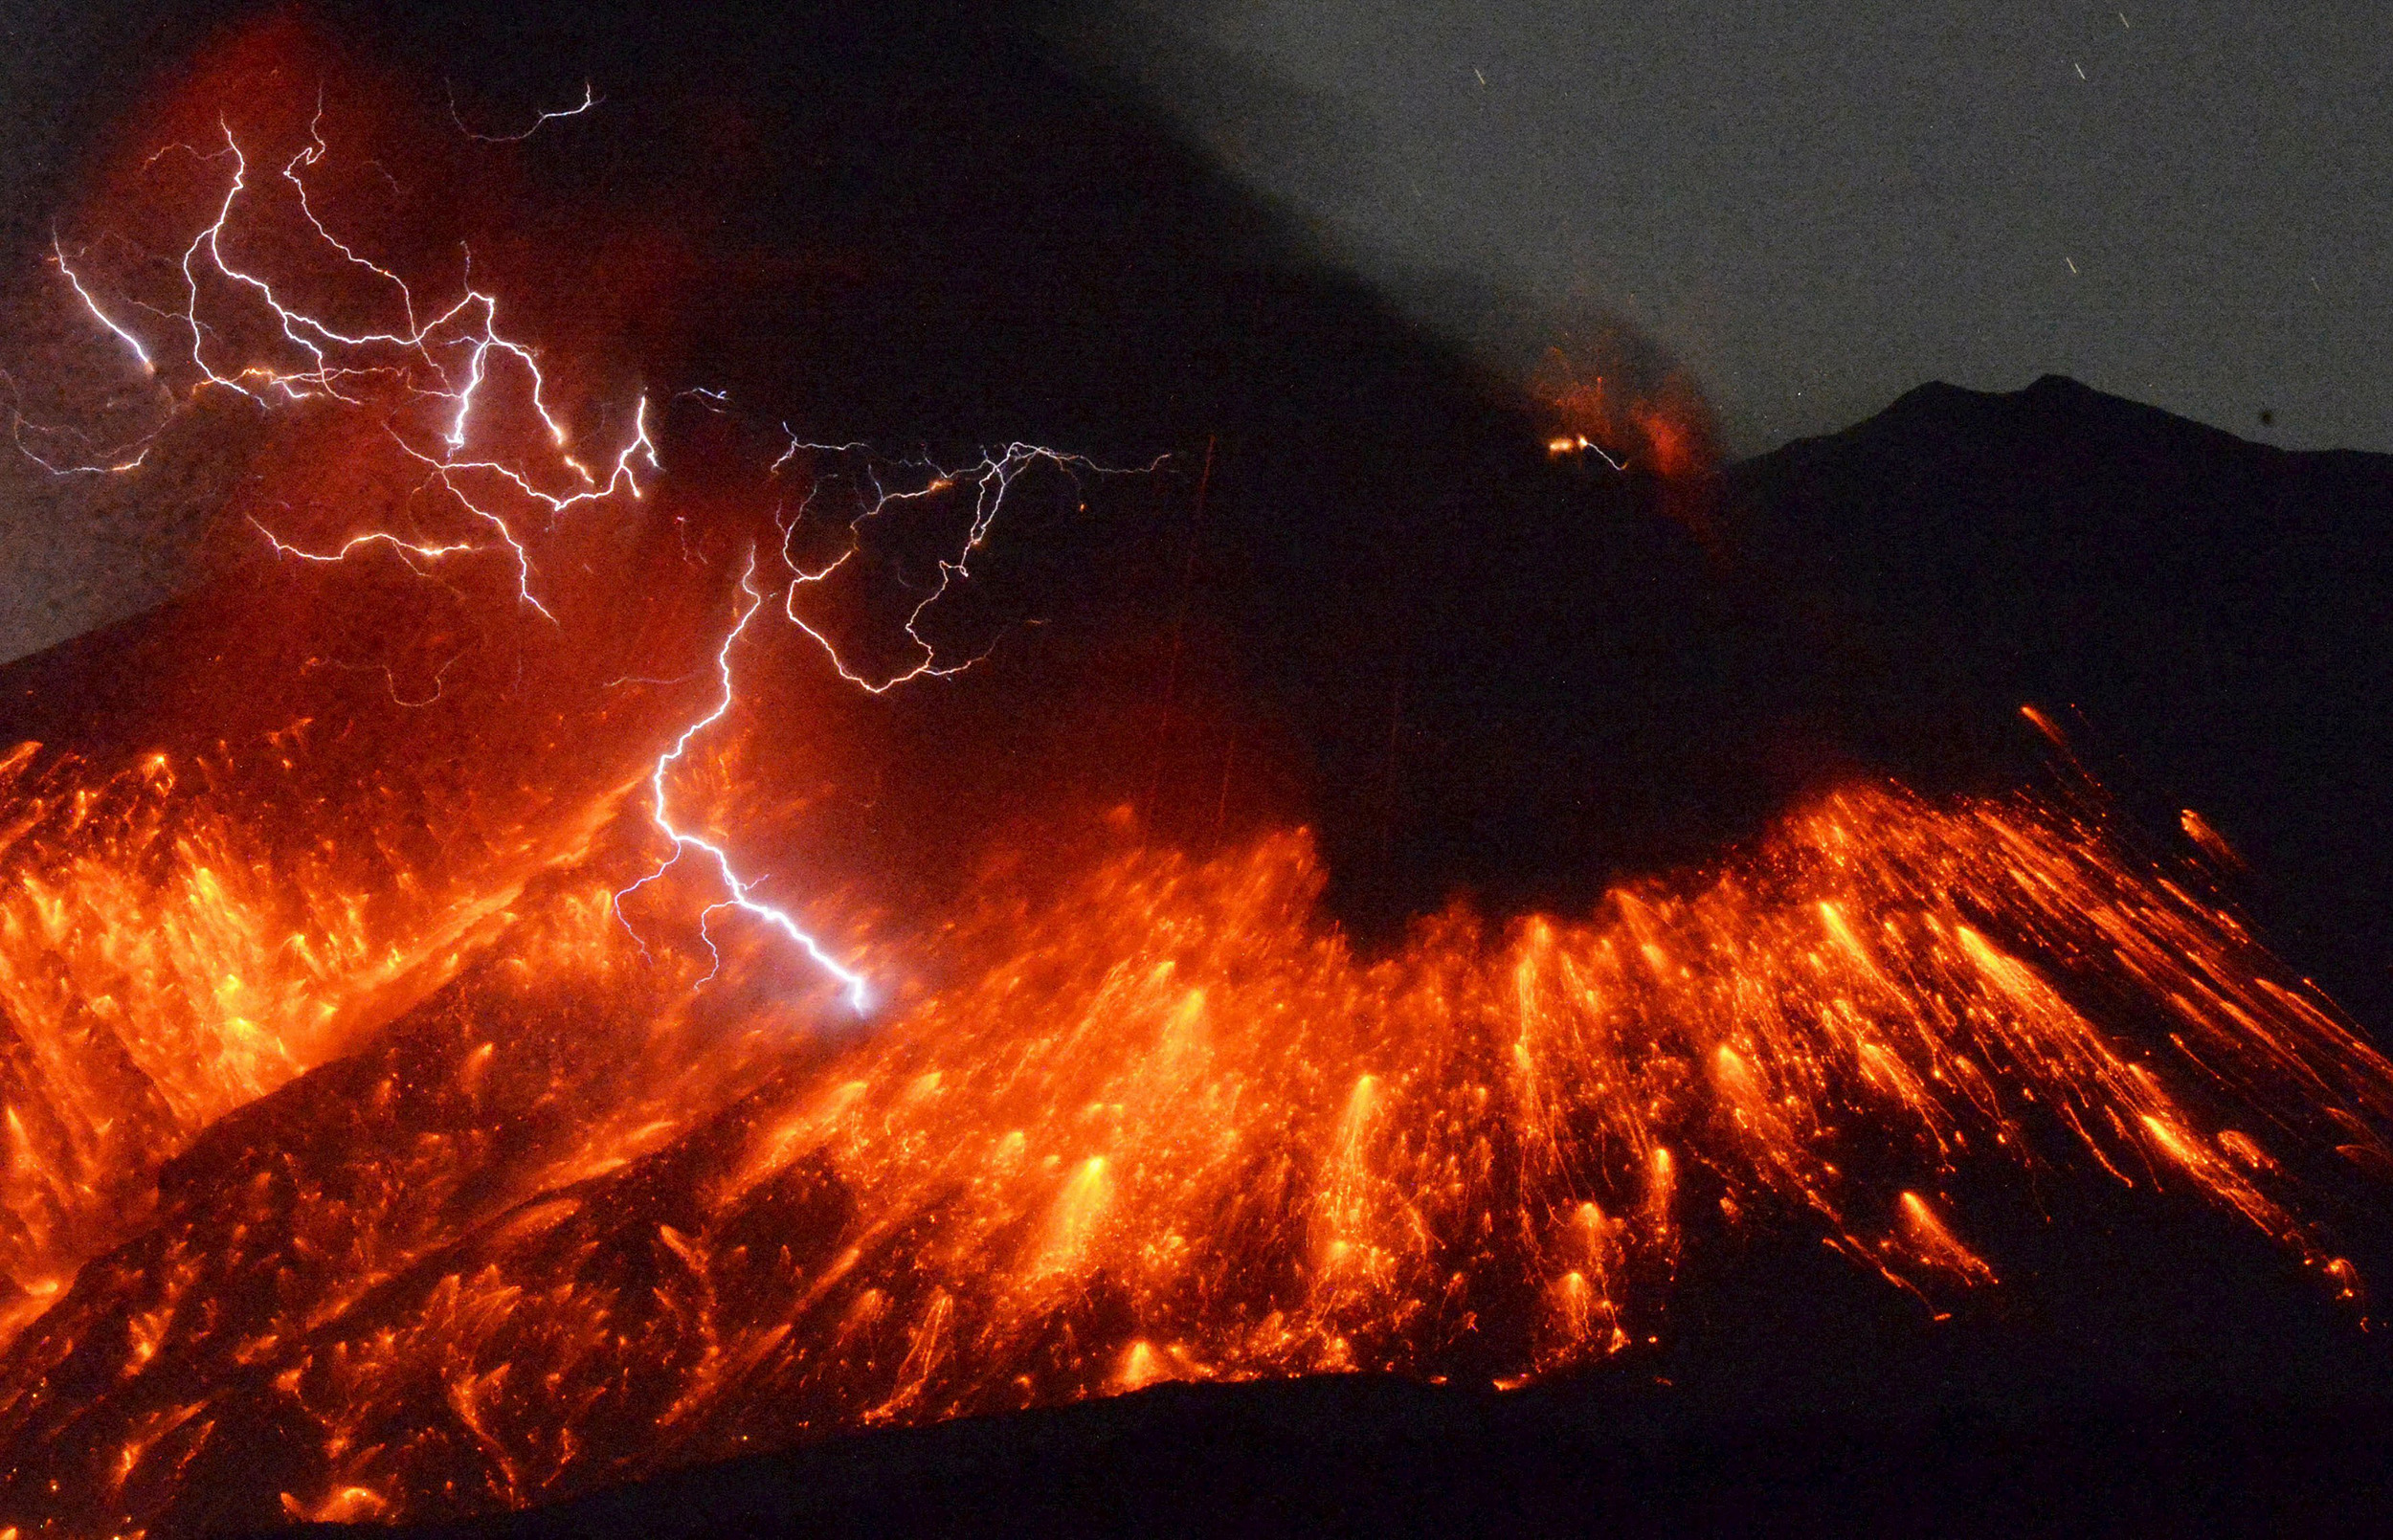 Volcanic lightning is seen at an eruption of Mount Sakurajima from Tarumizu city in southwestern Japan on Feb. 5, 2016. A Japanese volcano about 30 miles from a nuclear plant erupted on Friday, Japan's Meteorological Agency said, sending fountains of lava into the night sky. (Kyodo/Reuters)